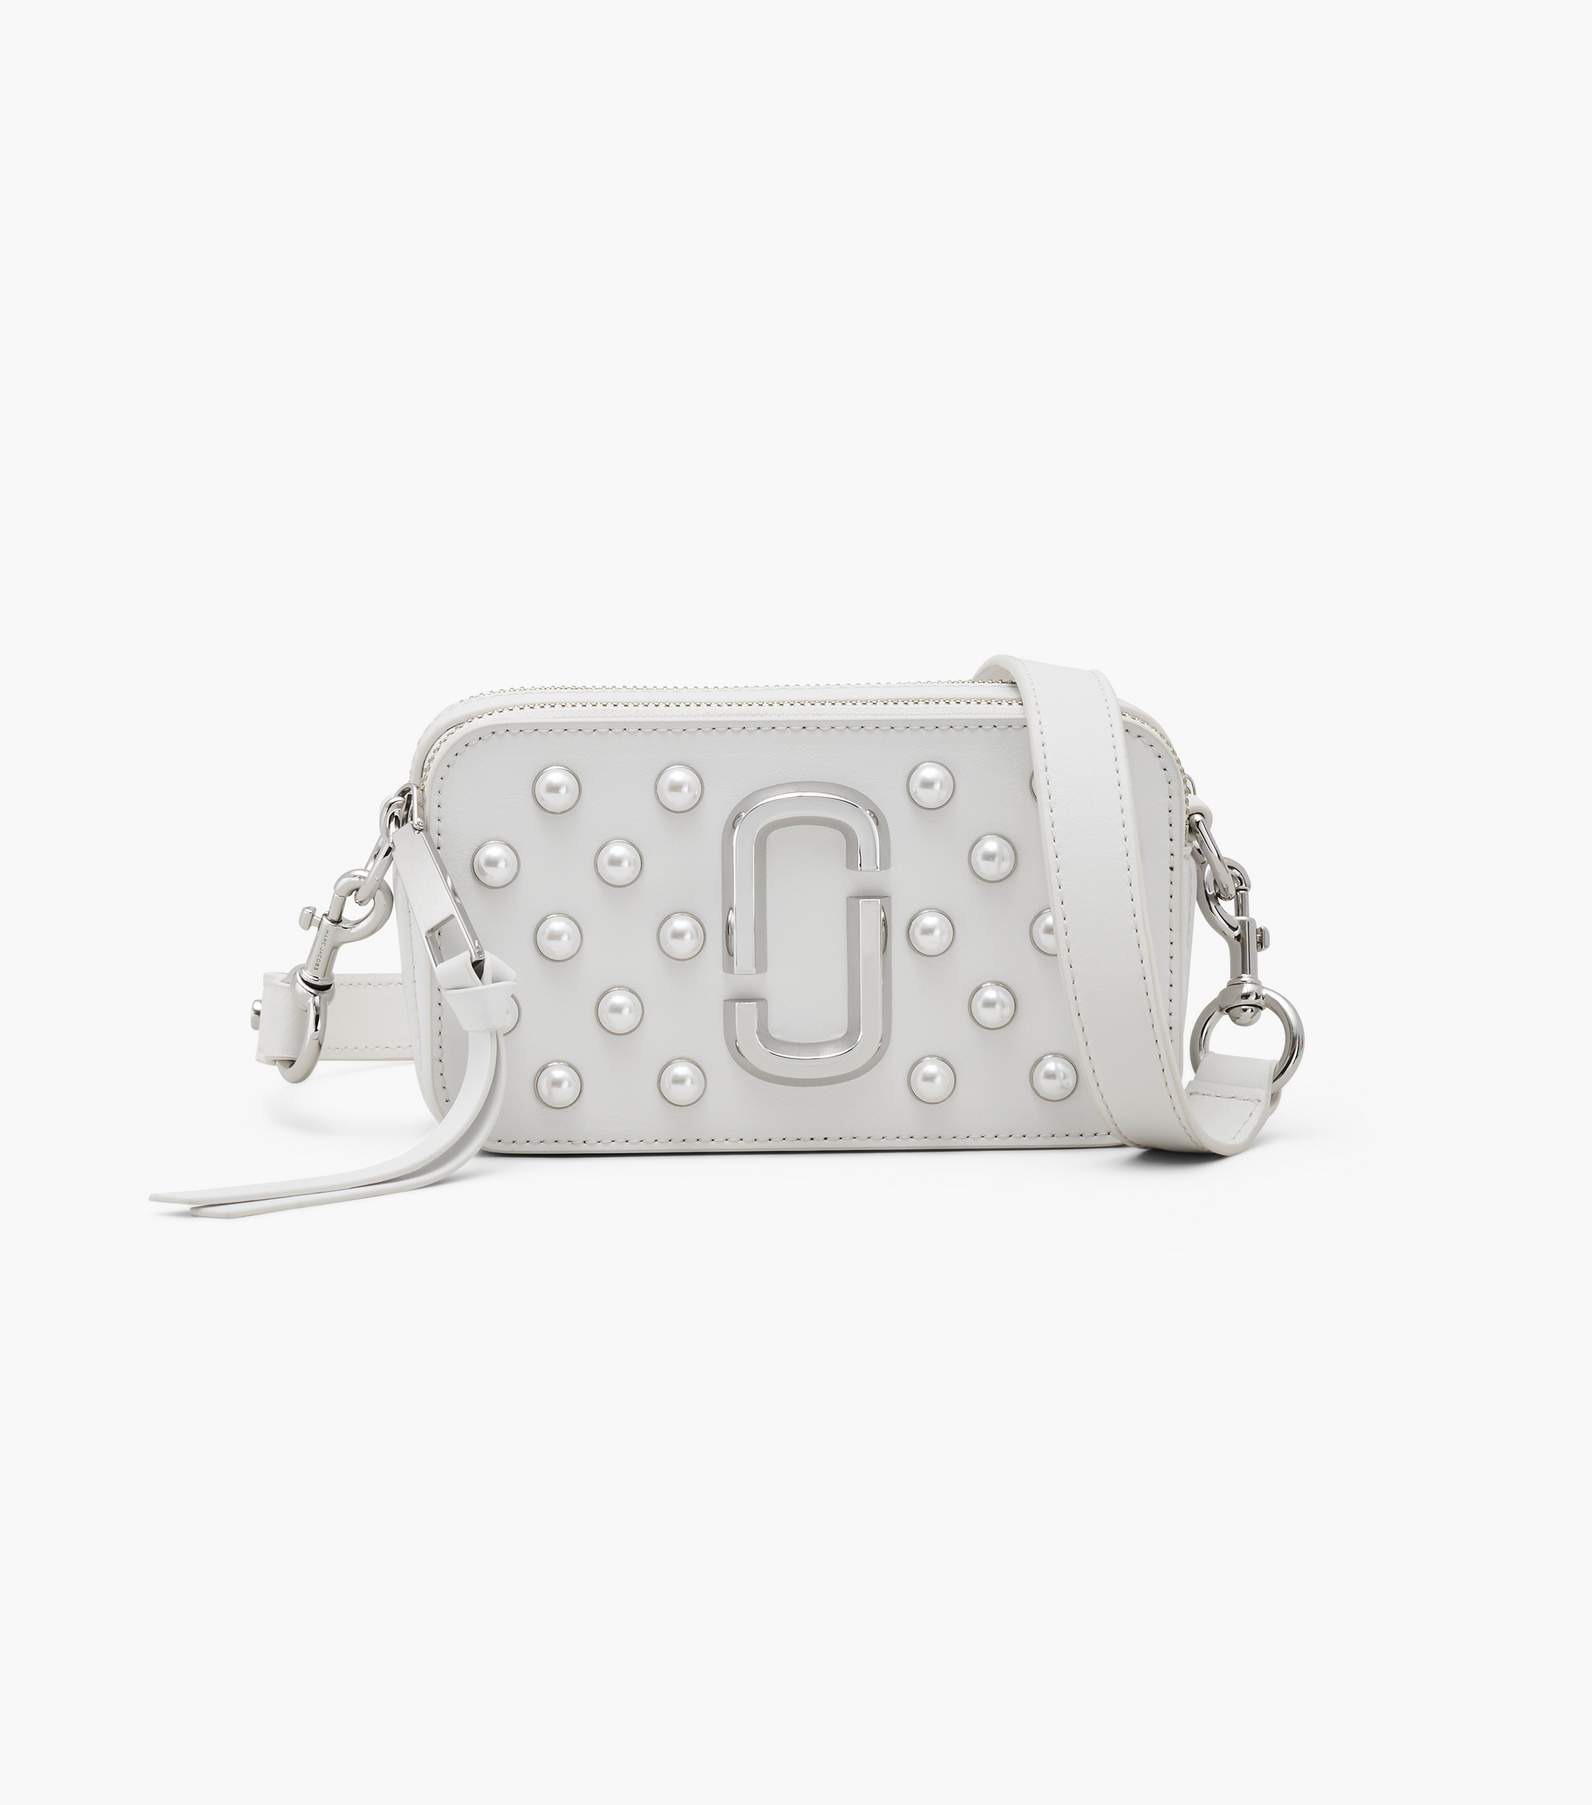 The Pearl Snapshot Bag in White